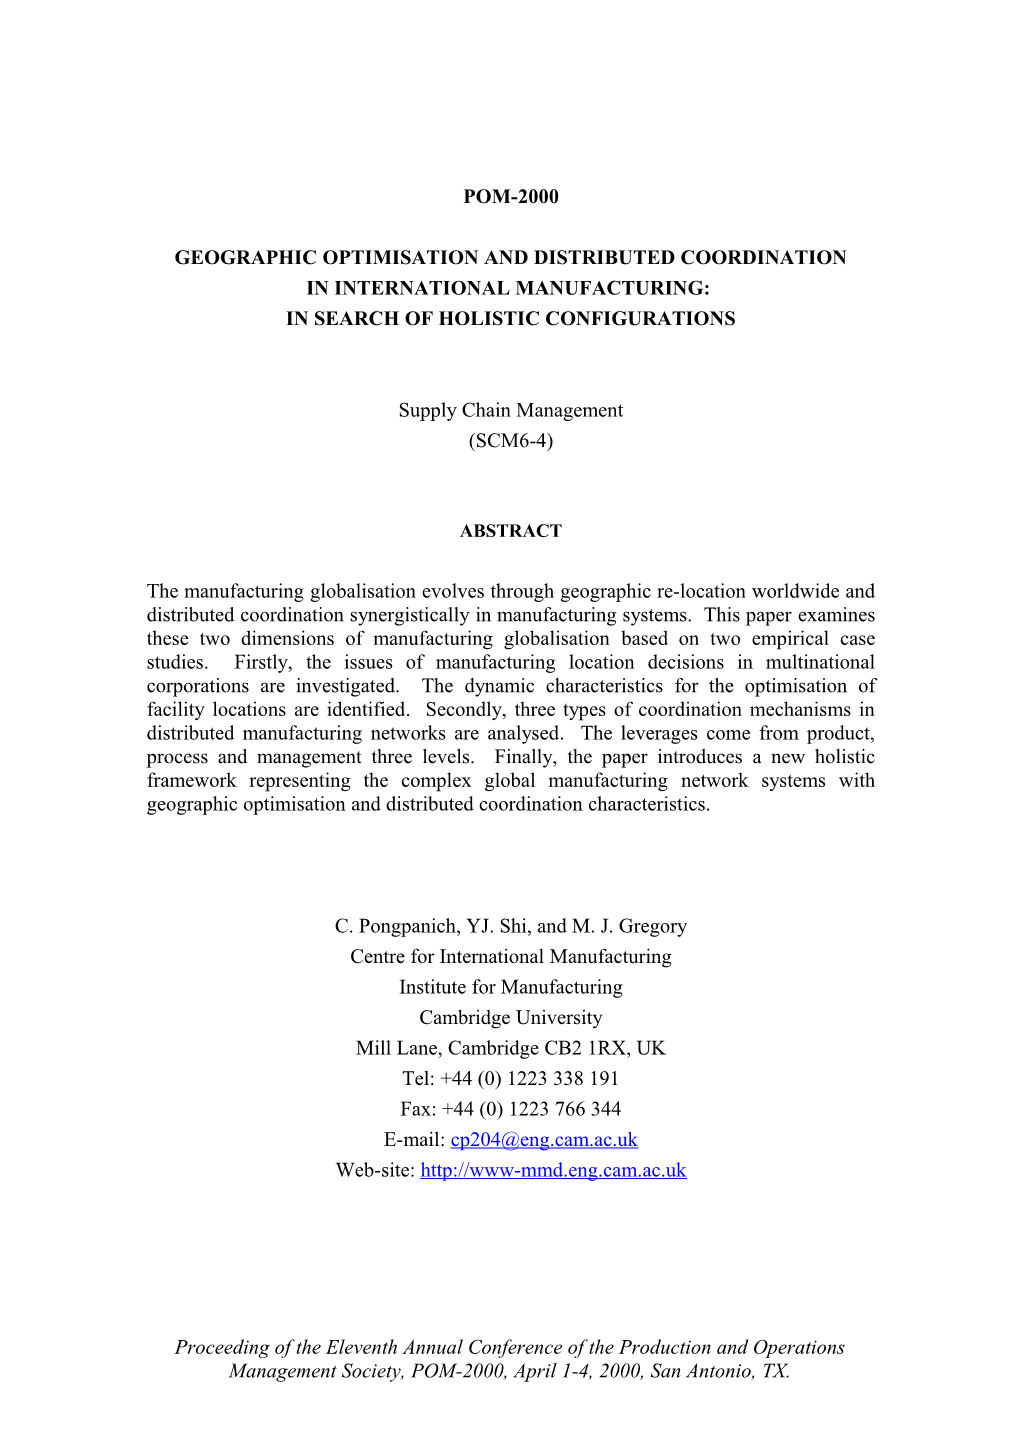 Geographic Optimisation and Distributed Coordination in International Manufacturing: In